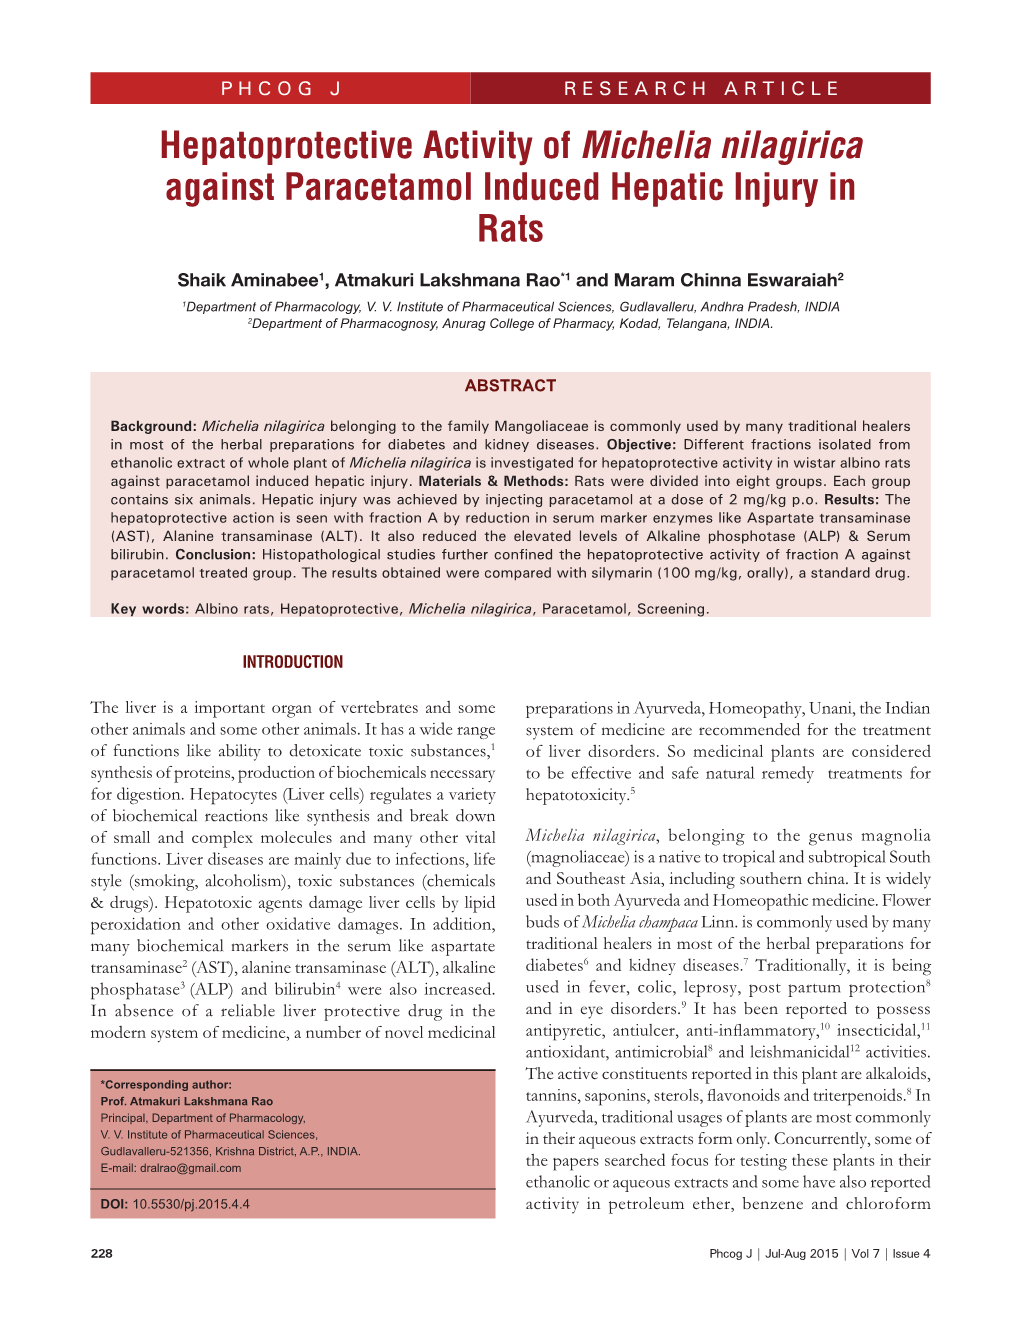 Hepatoprotective Activity of Michelia Nilagirica Against Paracetamol Induced Hepatic Injury in Rats